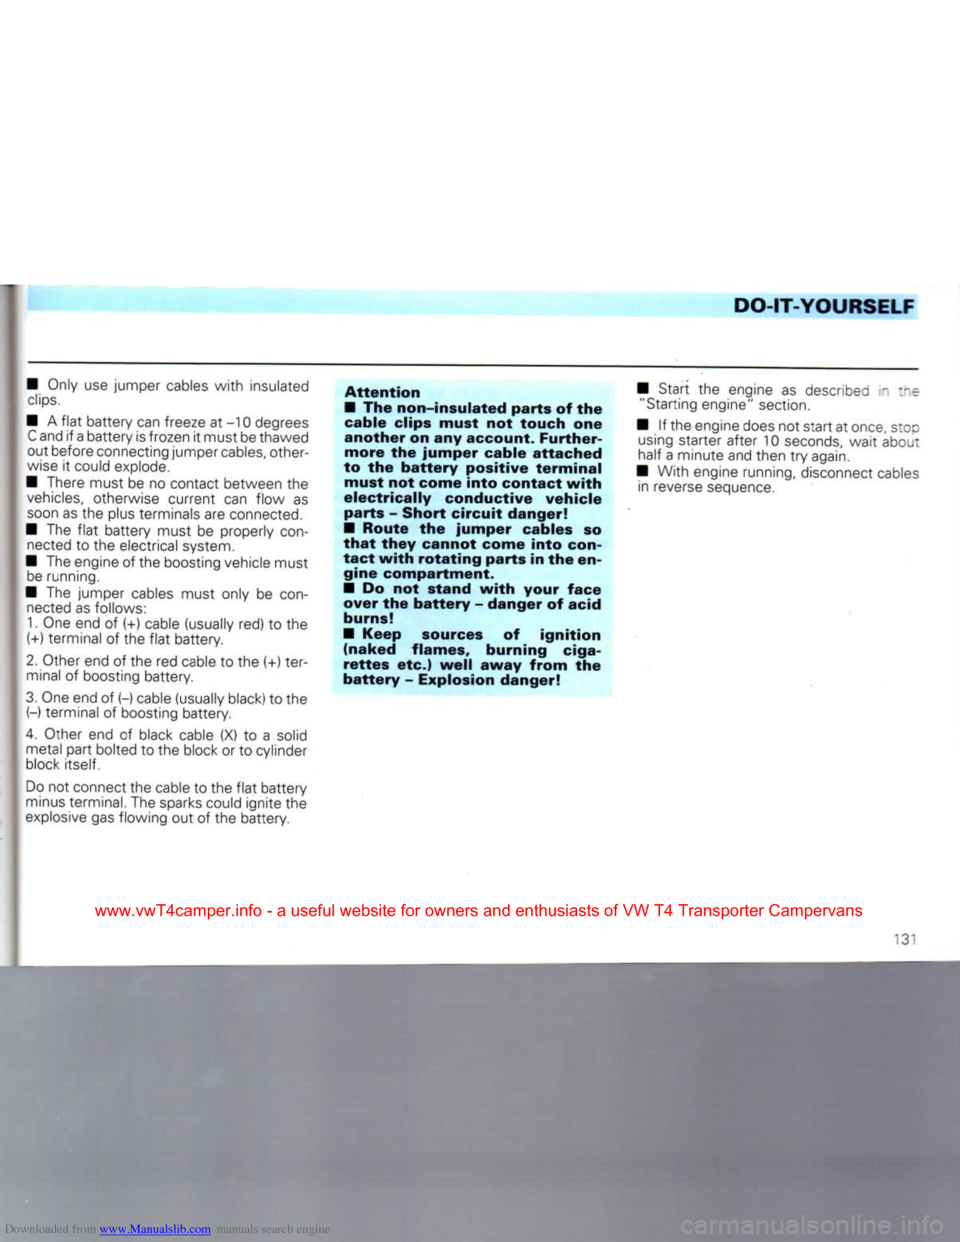 VOLKSWAGEN CARAVELLE 1992 T4 / 4.G Owners Manual Downloaded from www.Manualslib.com manuals search engine 
DO-IT-YOURSELF 
• Only
 use
 jumper cables
 with
 insulated 
 clips. 

•
 A
 flat
 battery can freeze
 at
 -10 degrees 
 C
 and
 if
 a bat